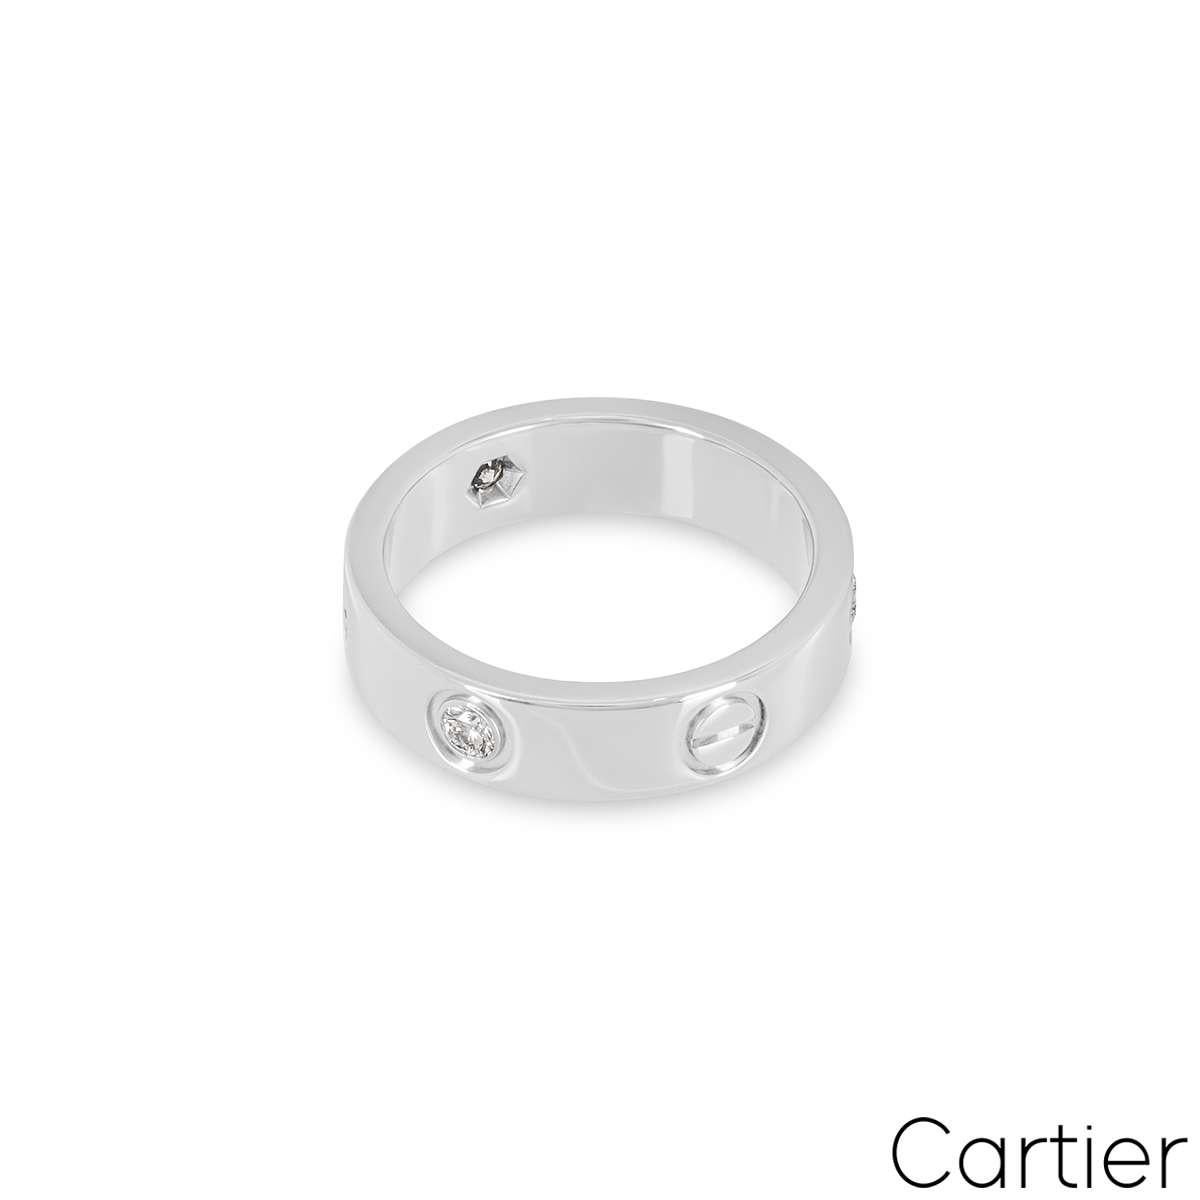 Cartier White Gold Half Diamond Love Ring Size 52 B4032500 In Excellent Condition For Sale In London, GB